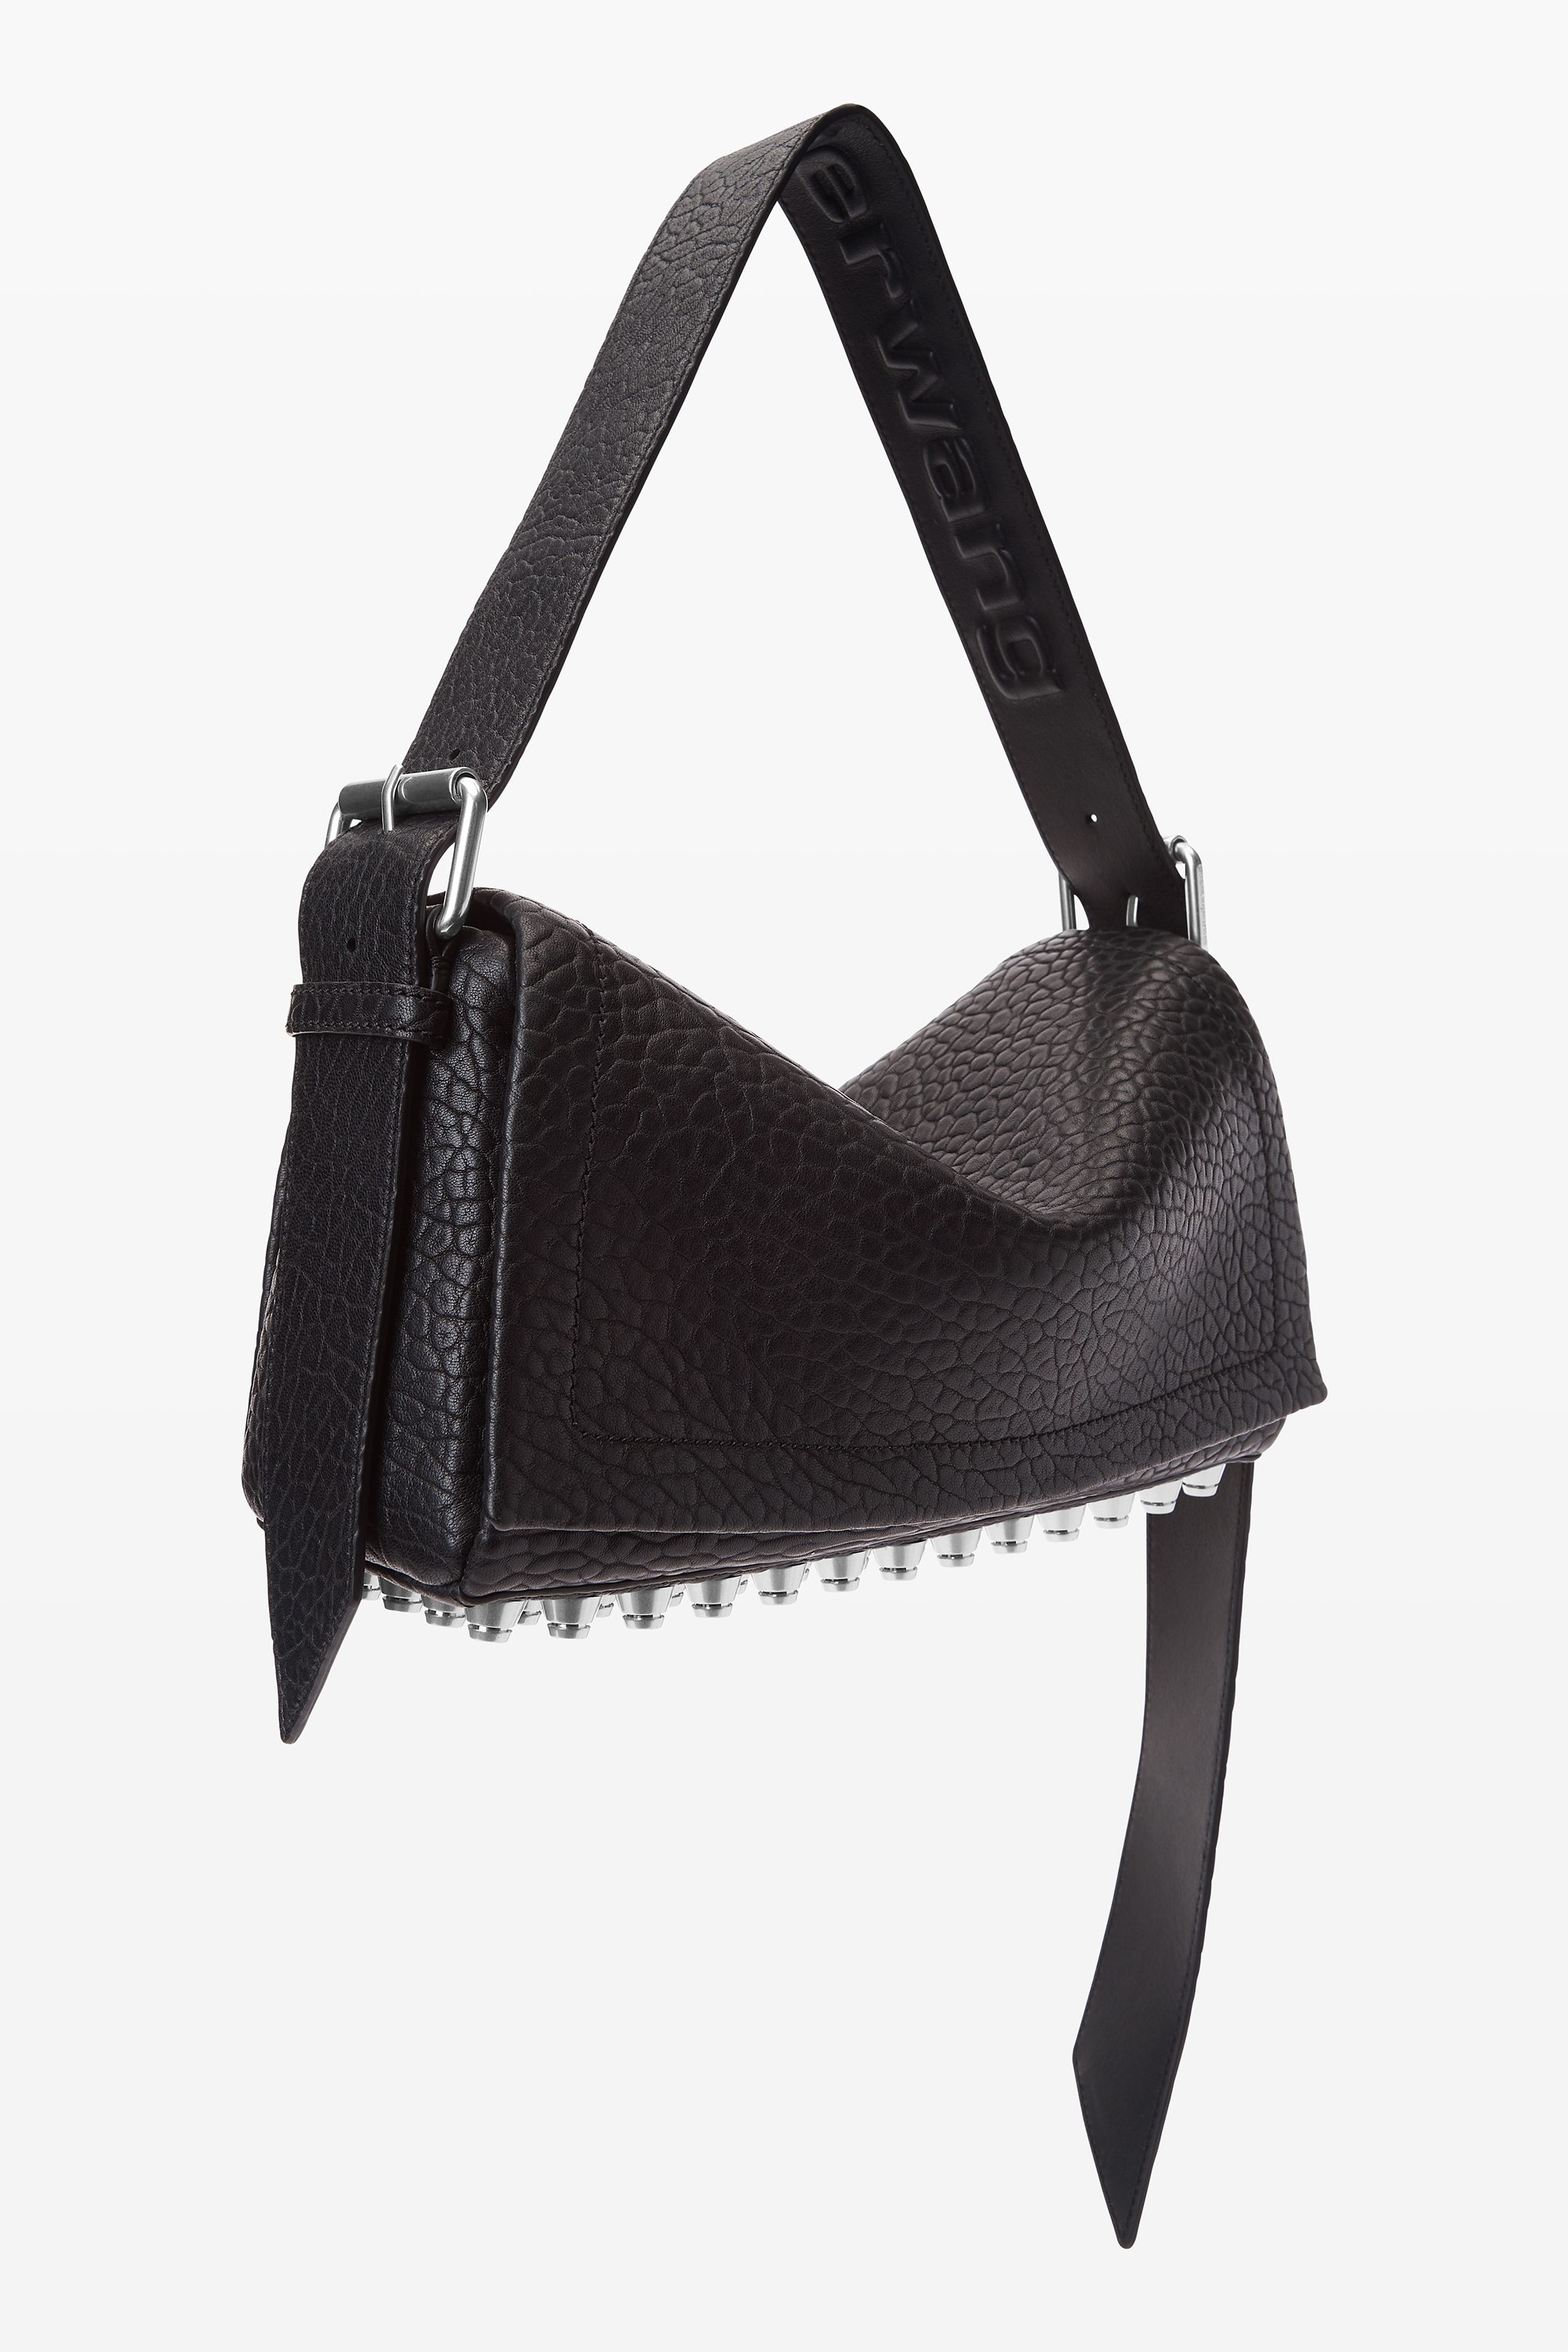 A textured leather handbag with a wide strap and metal stud detailing on the bottom, designed by Alexander Wang